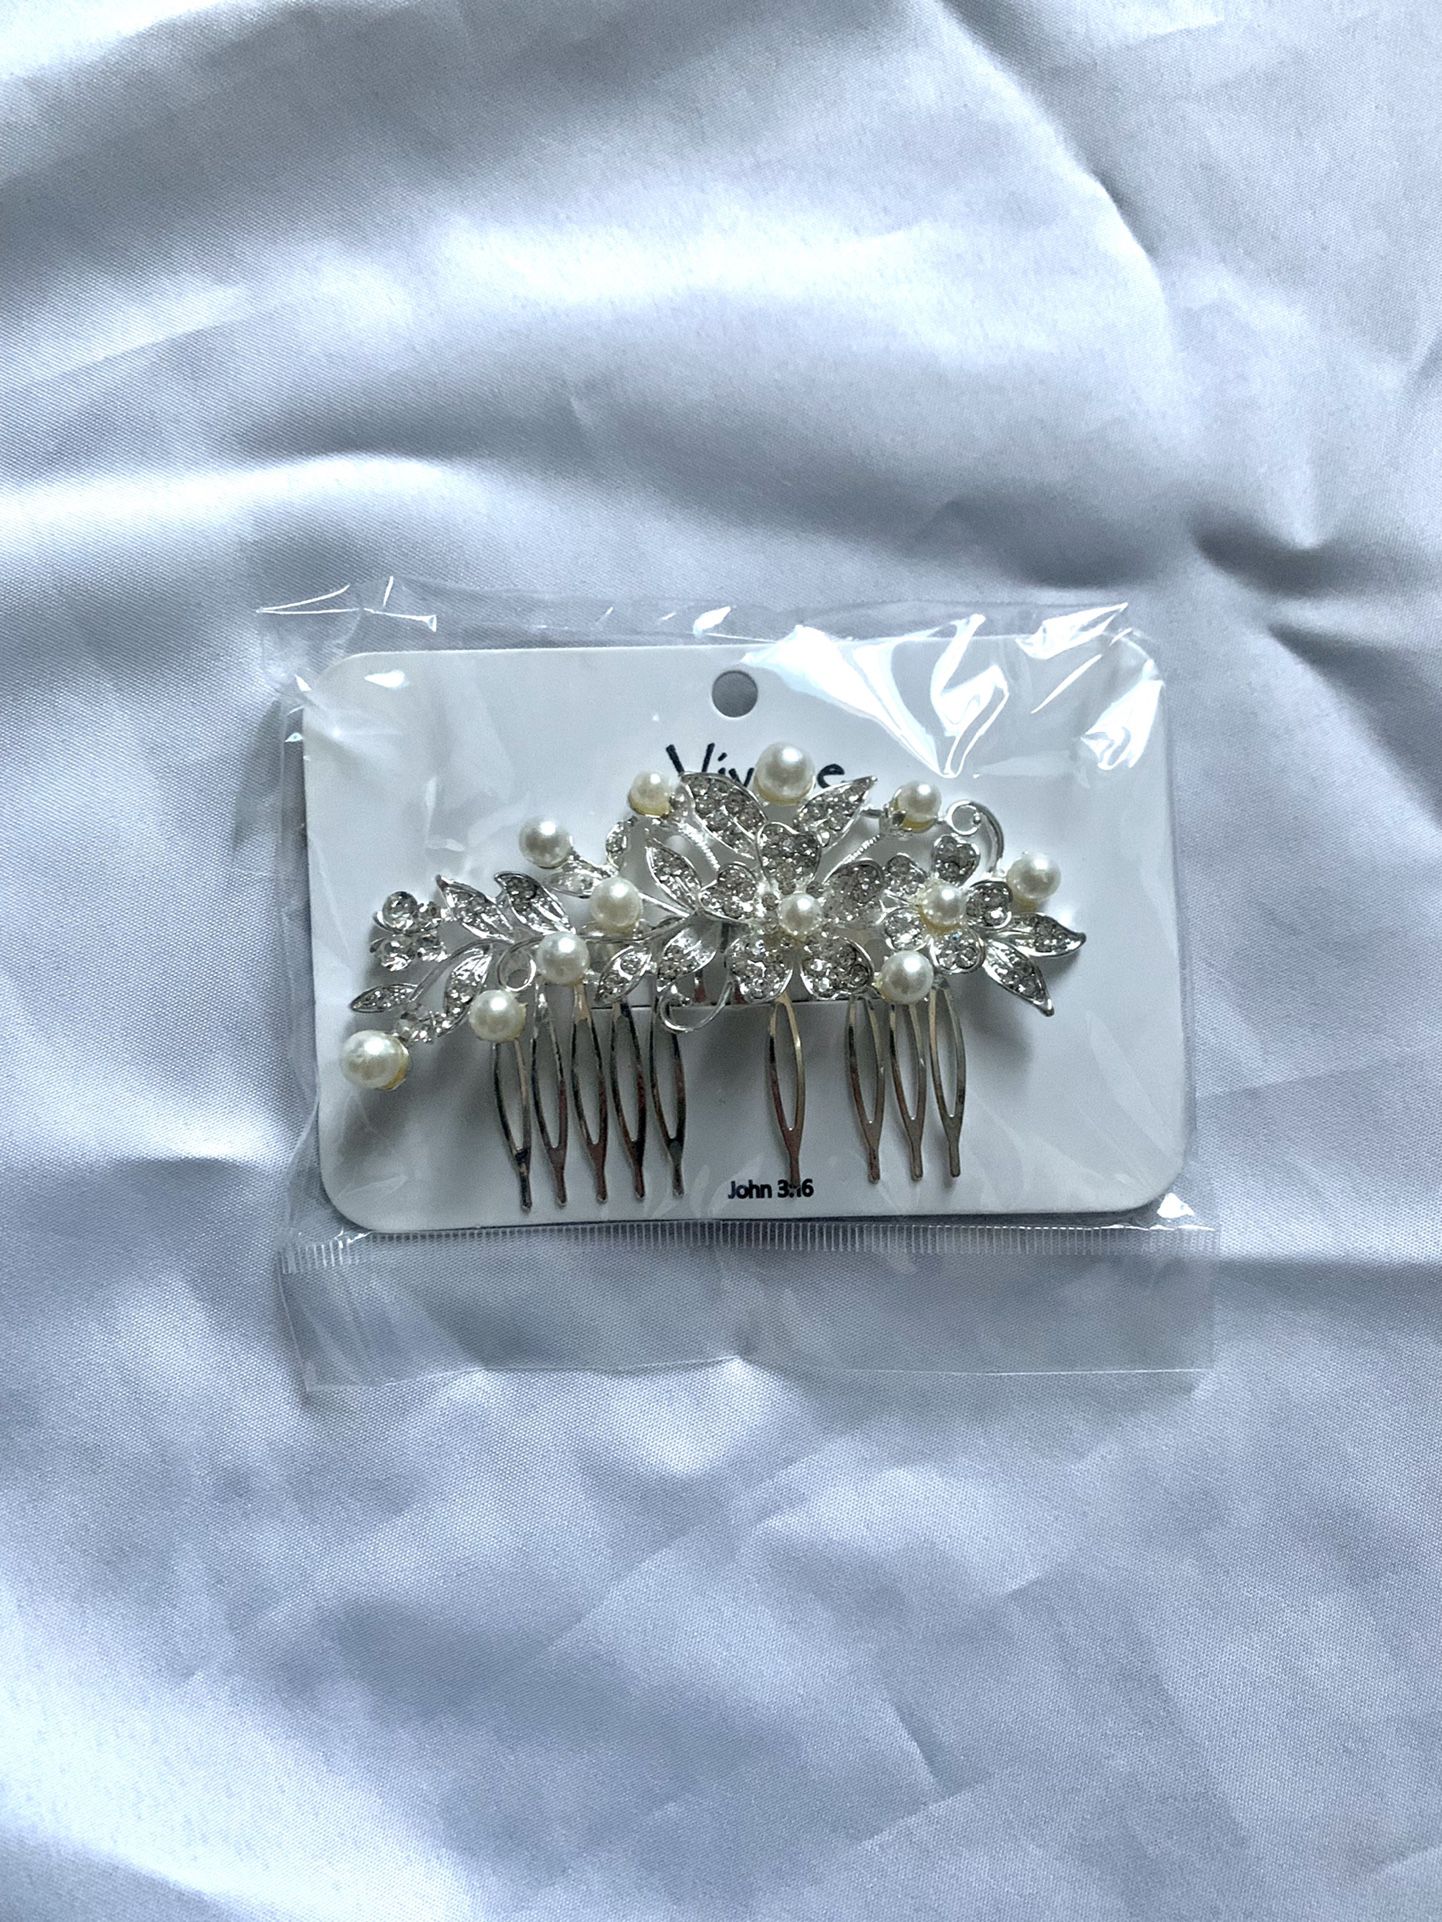 Women's Hair Jewel Pearl Barrette Comb Clip / Wedding, Prom, Party,  Homecoming for Sale in Glendale, AZ - OfferUp